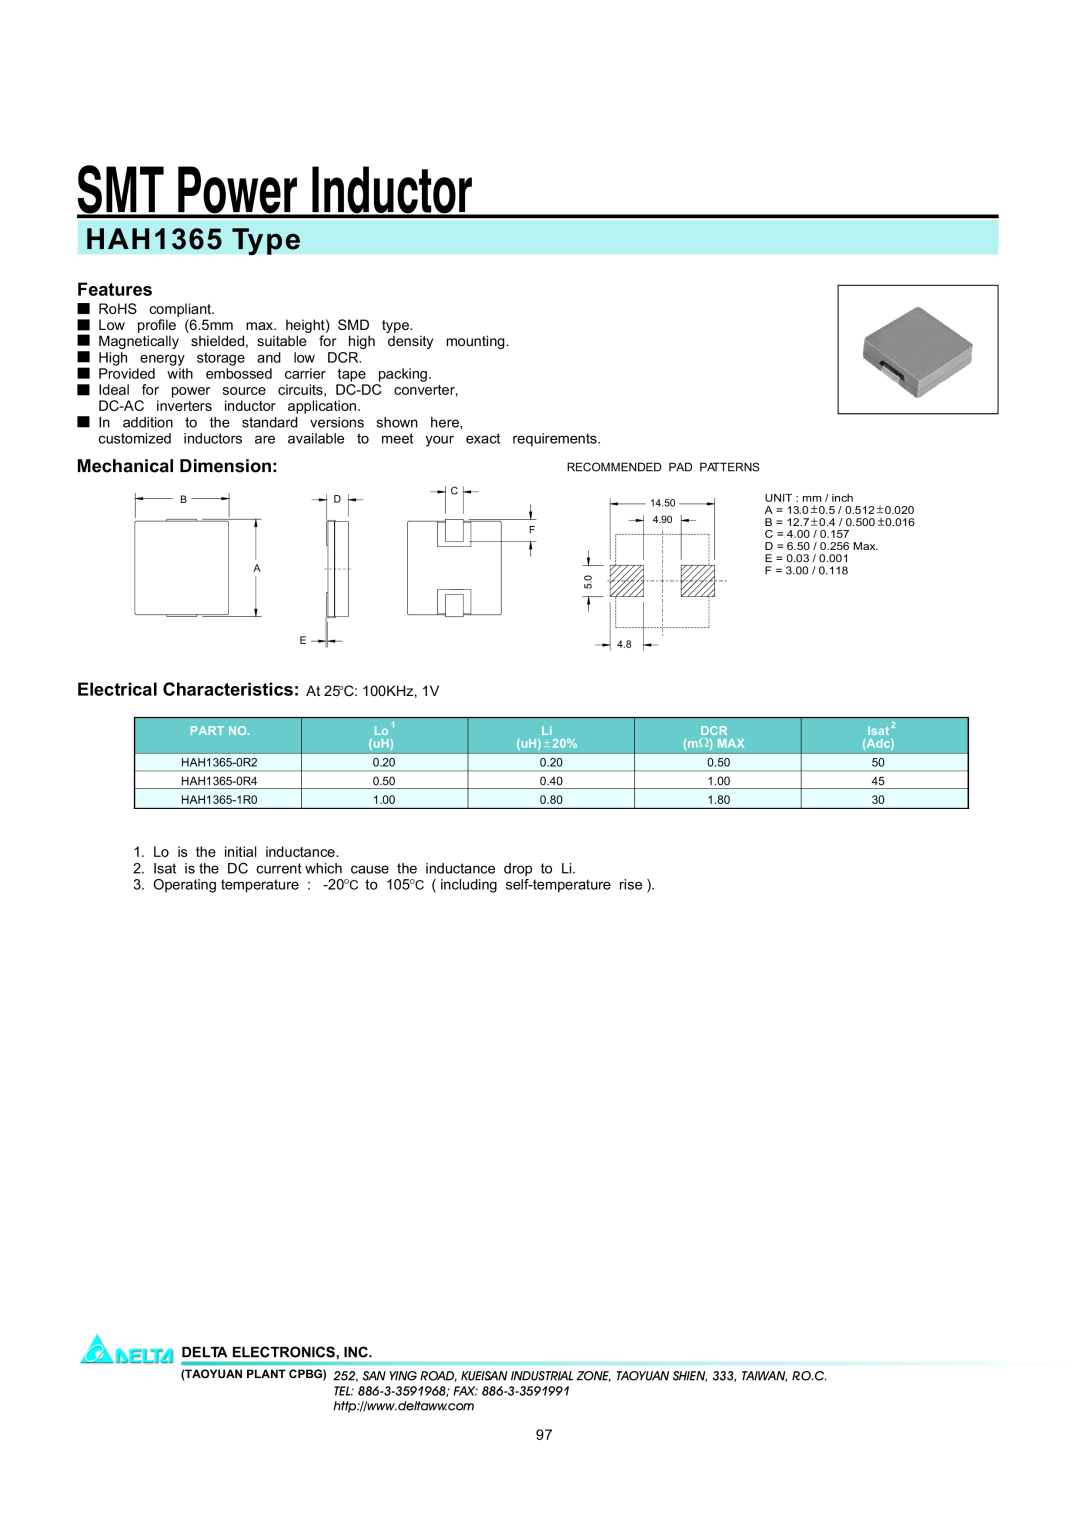 Delta Electronics manual SMT Power Inductor, HAH1365 Type, Features, Mechanical Dimension, Delta Electronics, Inc 